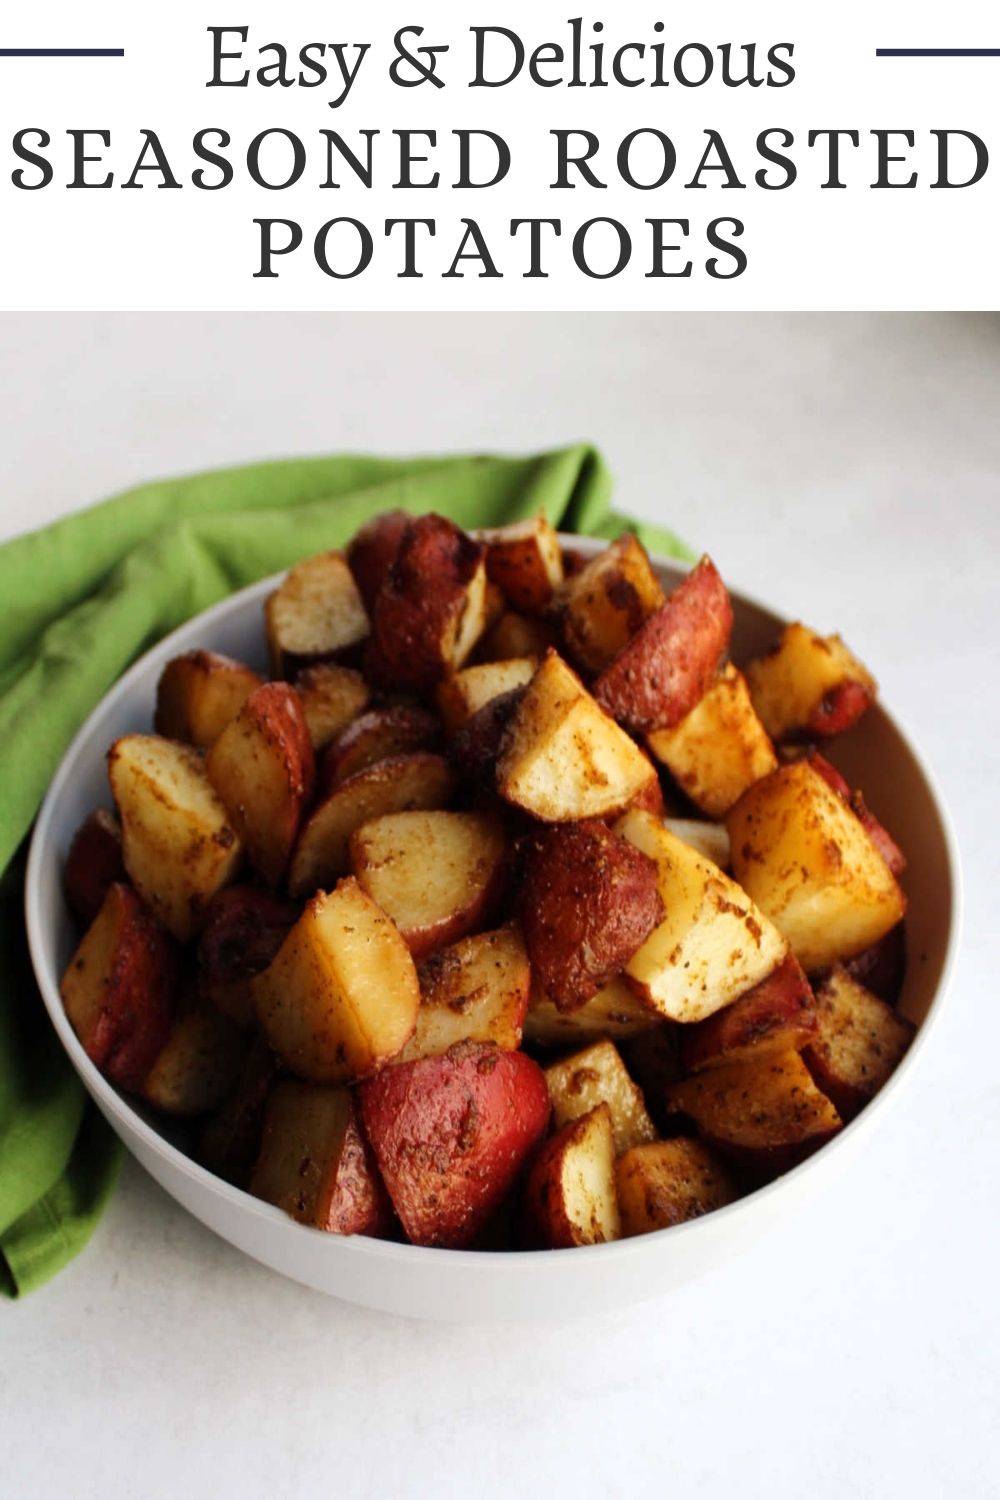 Roasted potatoes are a versatile and easy side dish. These have the perfect amount of seasoning on the outside and are soft and delicious on the inside too.